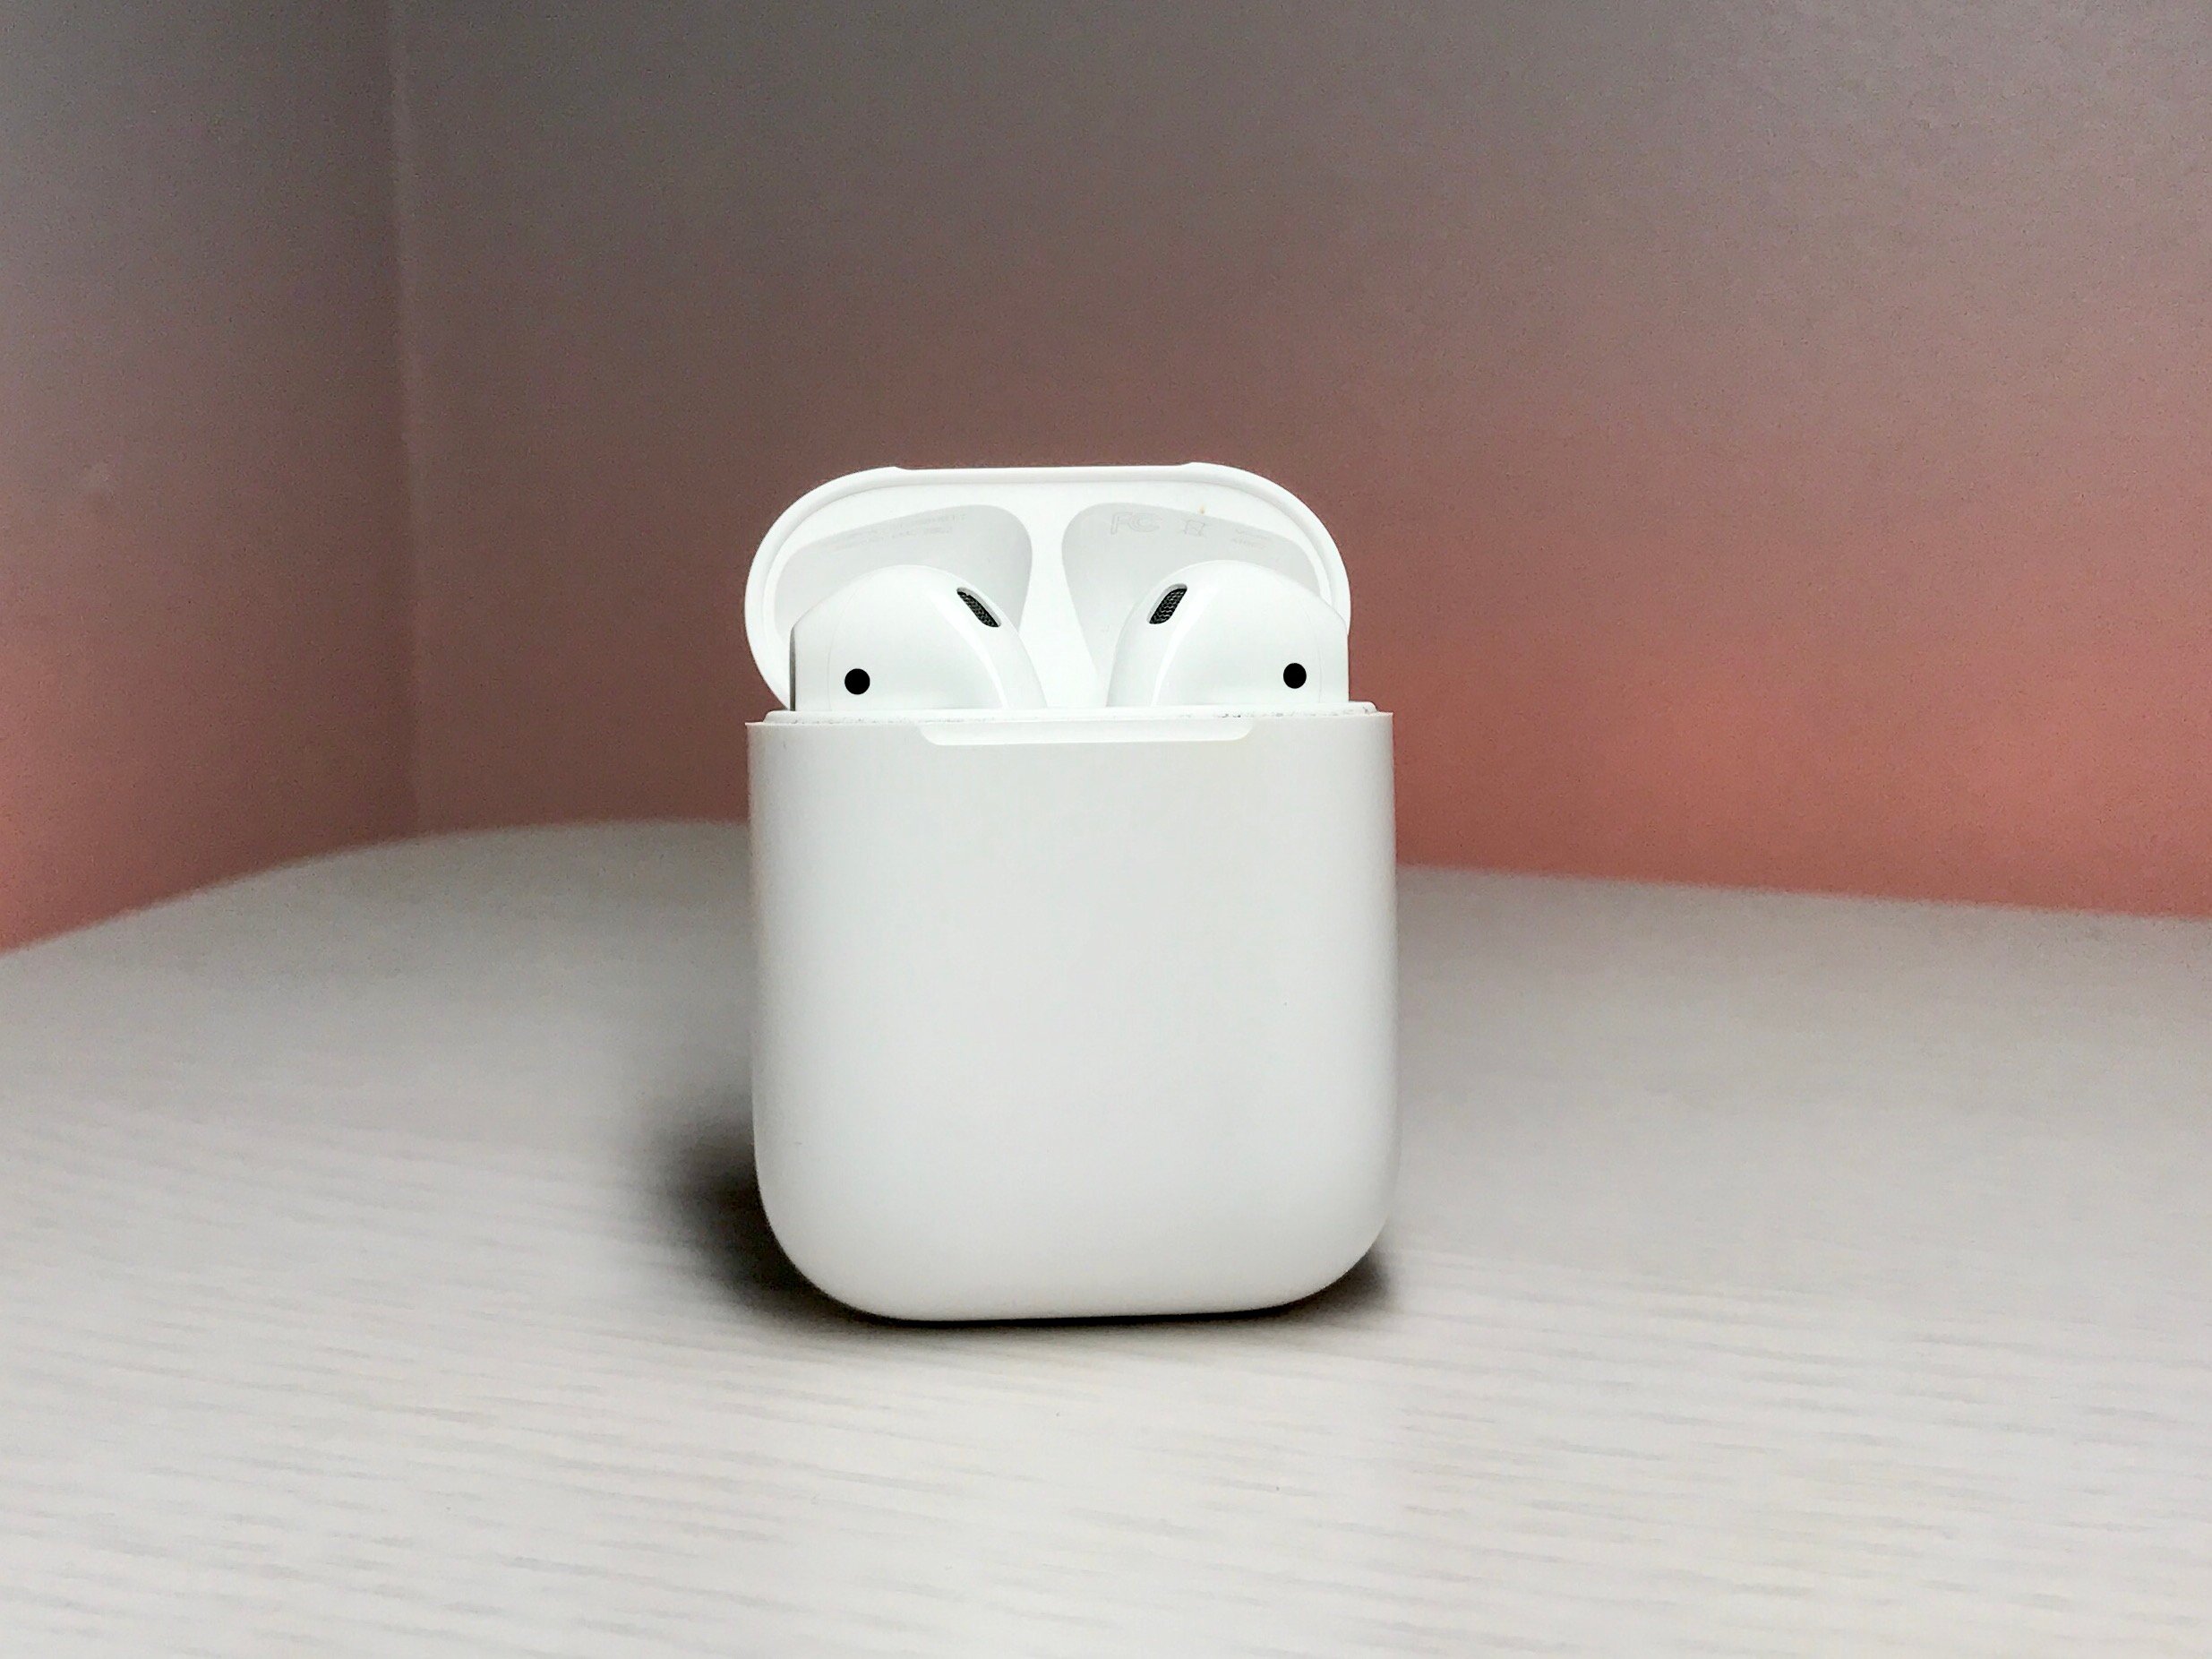 How to find AirPods in stock.